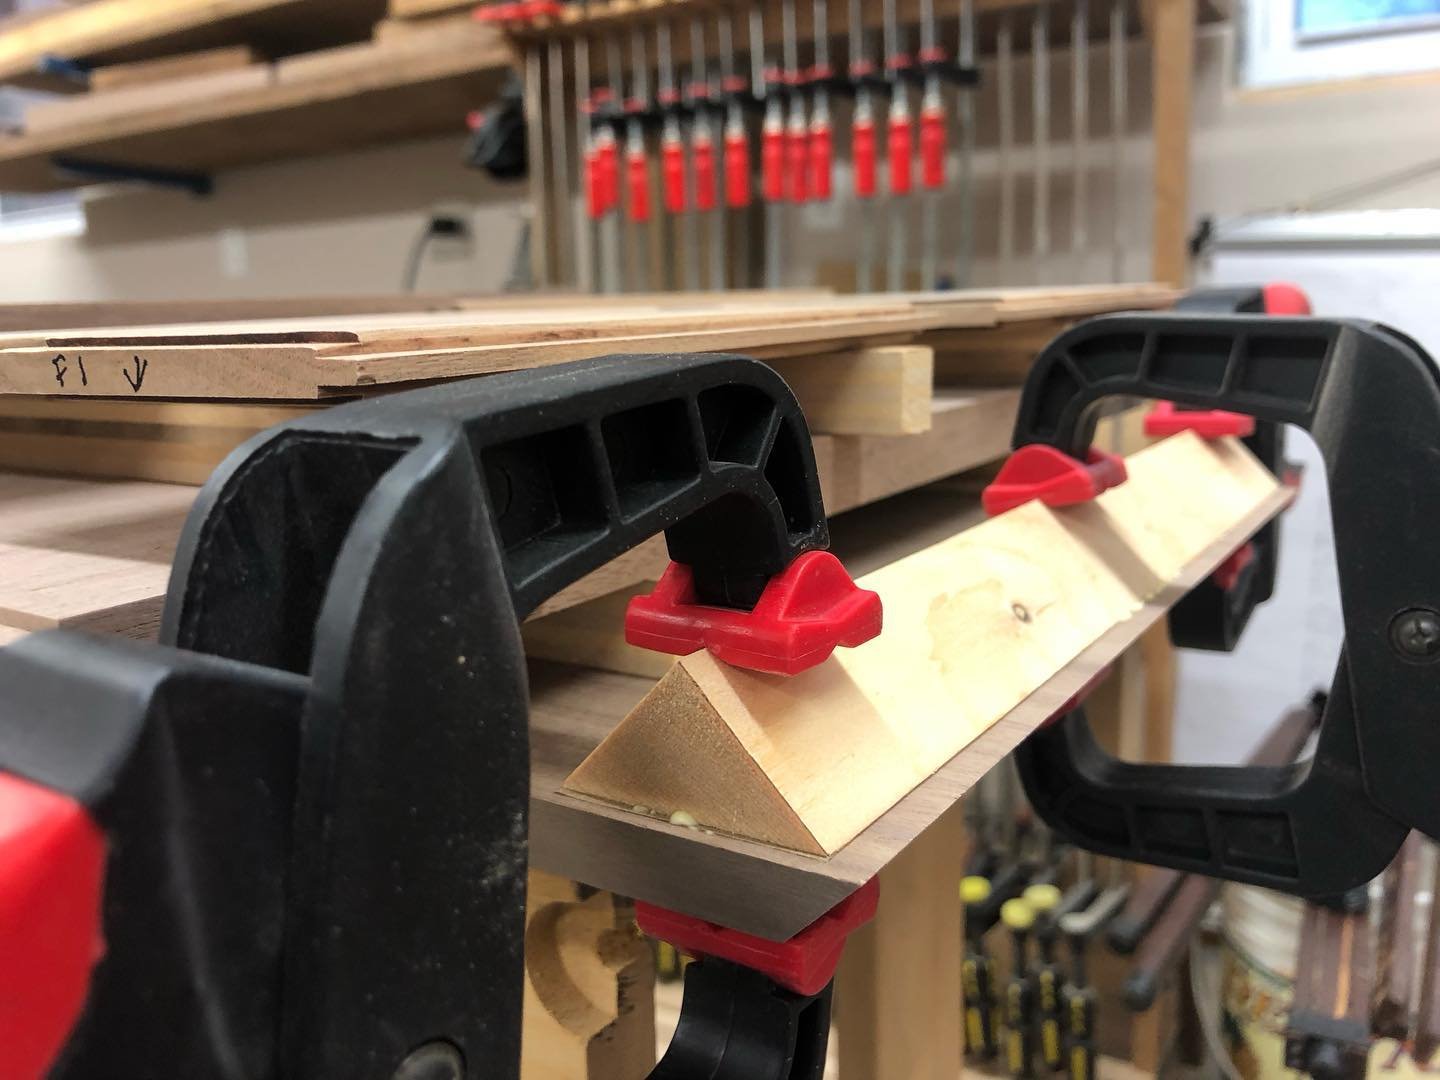 Gluing up the case. Such a simple idea. Gluing temporary cleats to help glue up the case. Just need to use news print or something similar in between so you can remove the cleats. Every time I do it I&rsquo;m always amazed this works

#walnutcabineto